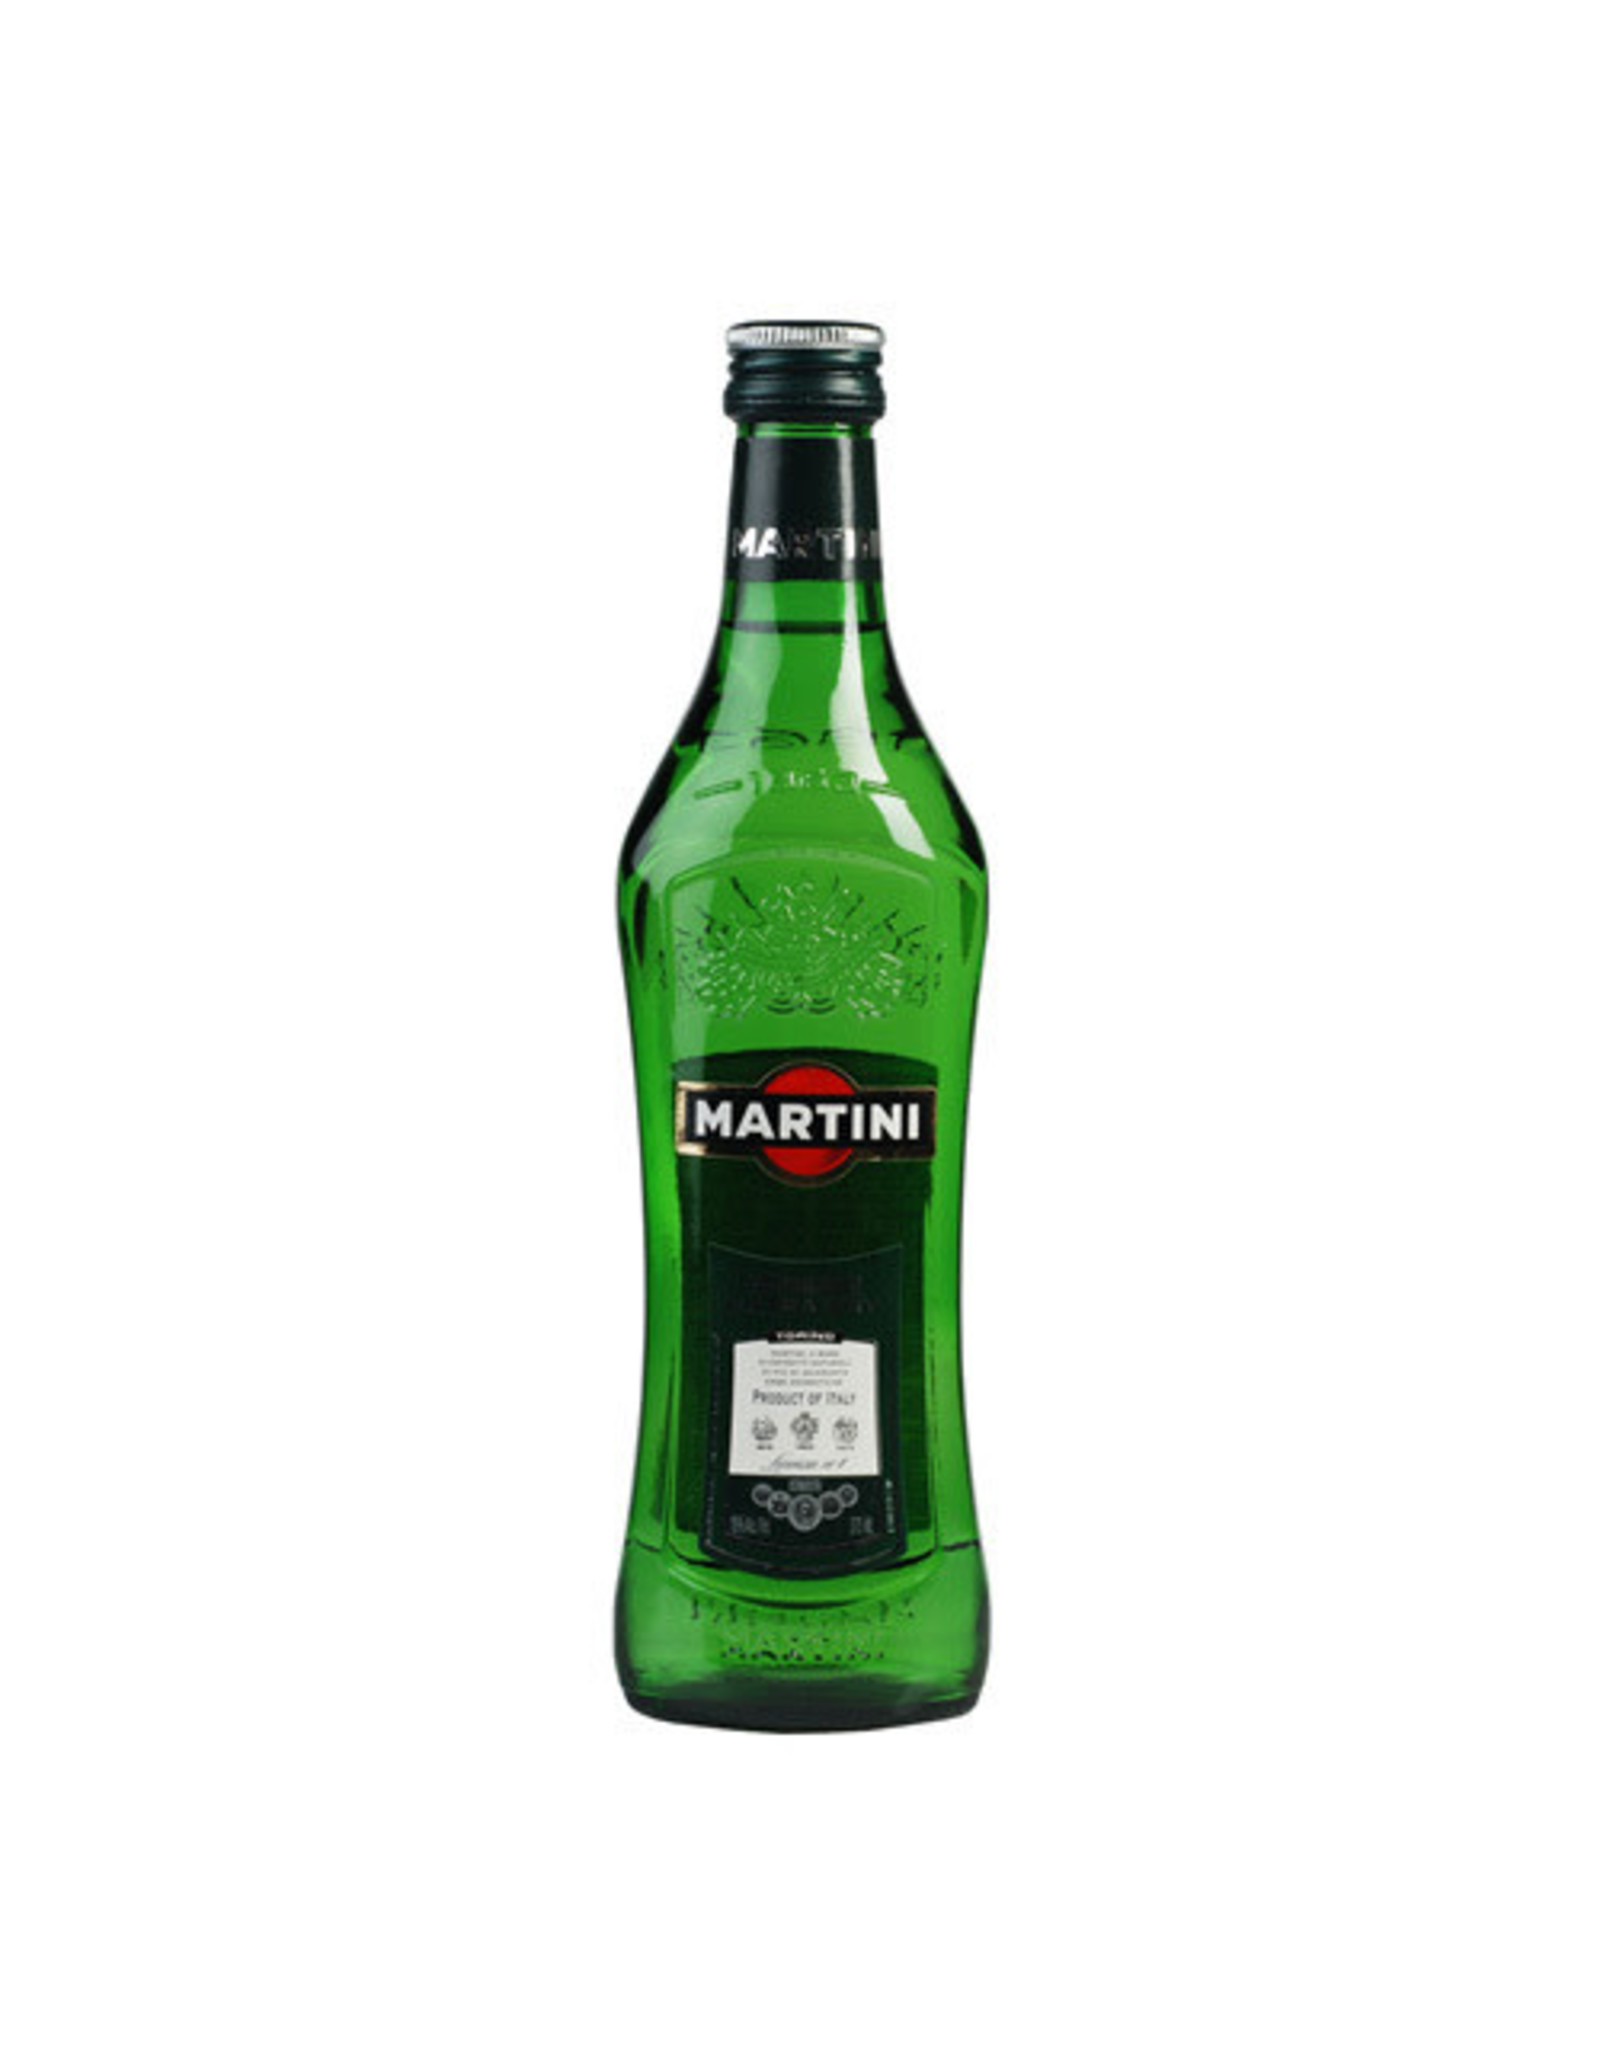 MARTINI & ROSSI EXTRA DRY VERMOUTH 375ML